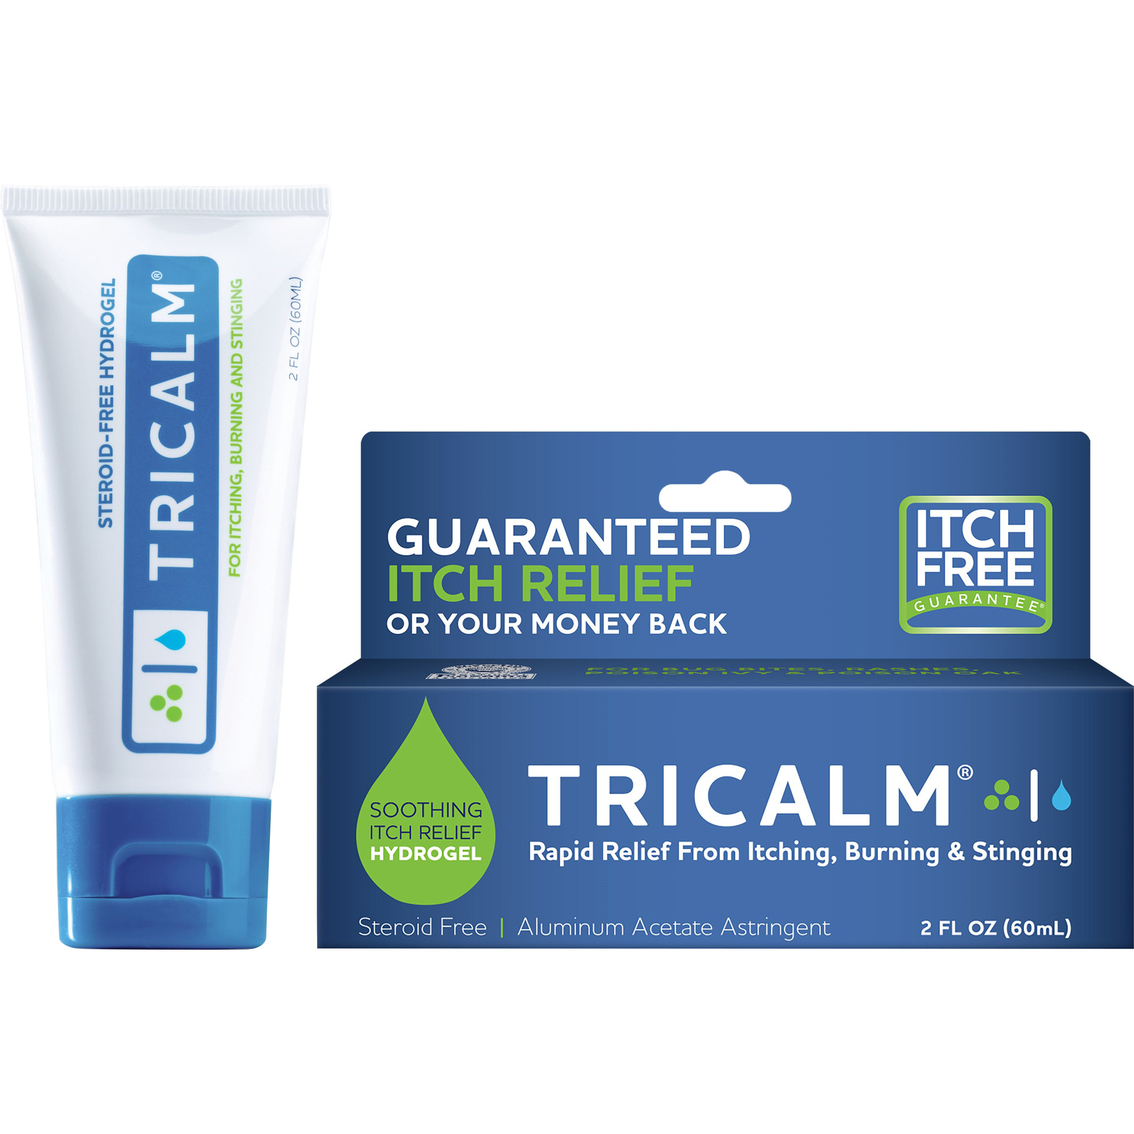 Tricalm Soothing Itch Relief Hydrogel 2 oz. - Image 2 of 2